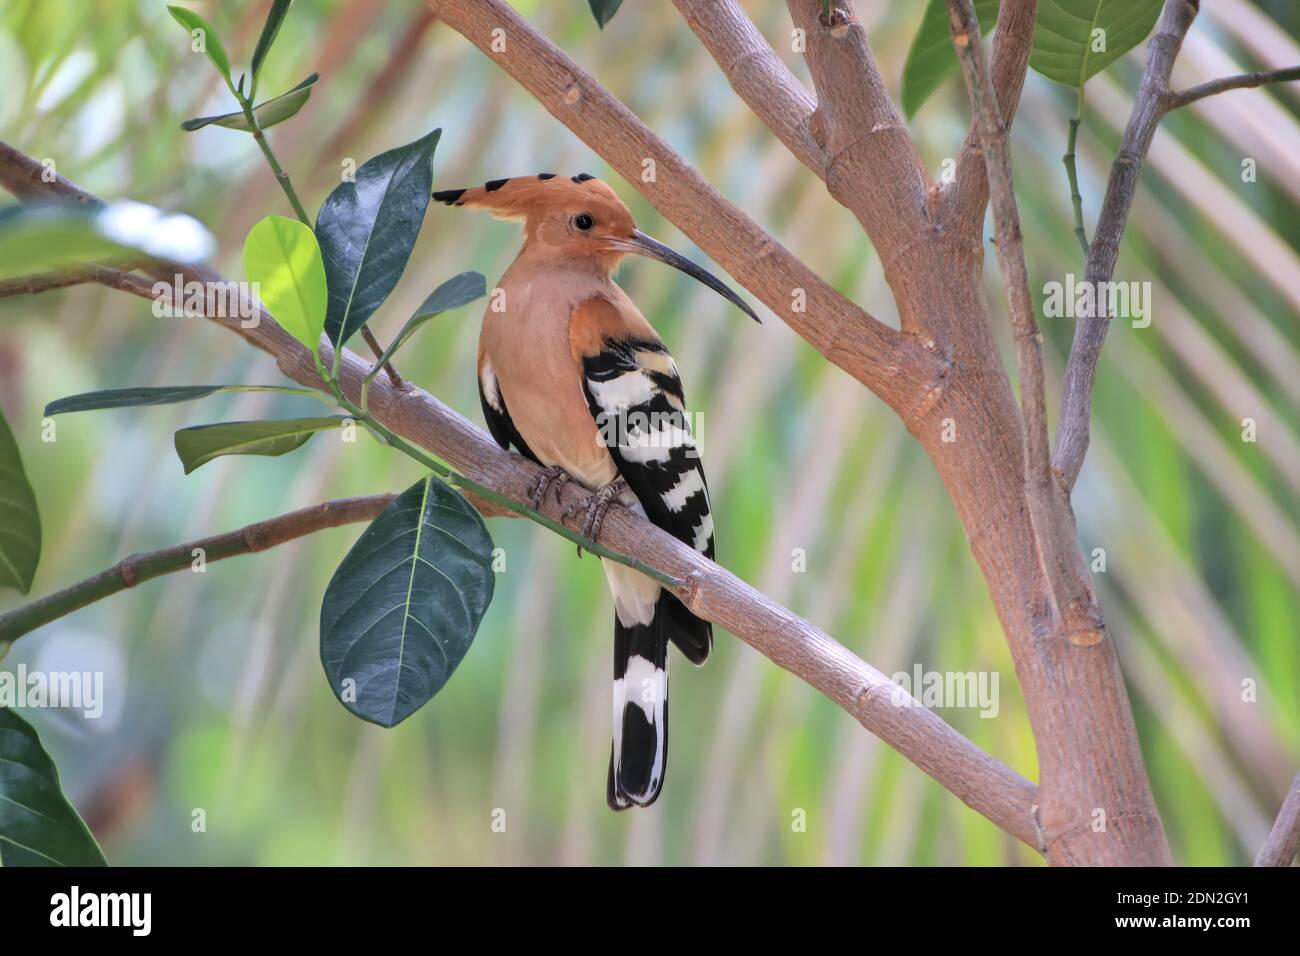 Hoopoe (Scientific name: Upupa epops) perched in the shade of trees. It is a rare bird in Thailand. Stock Photo